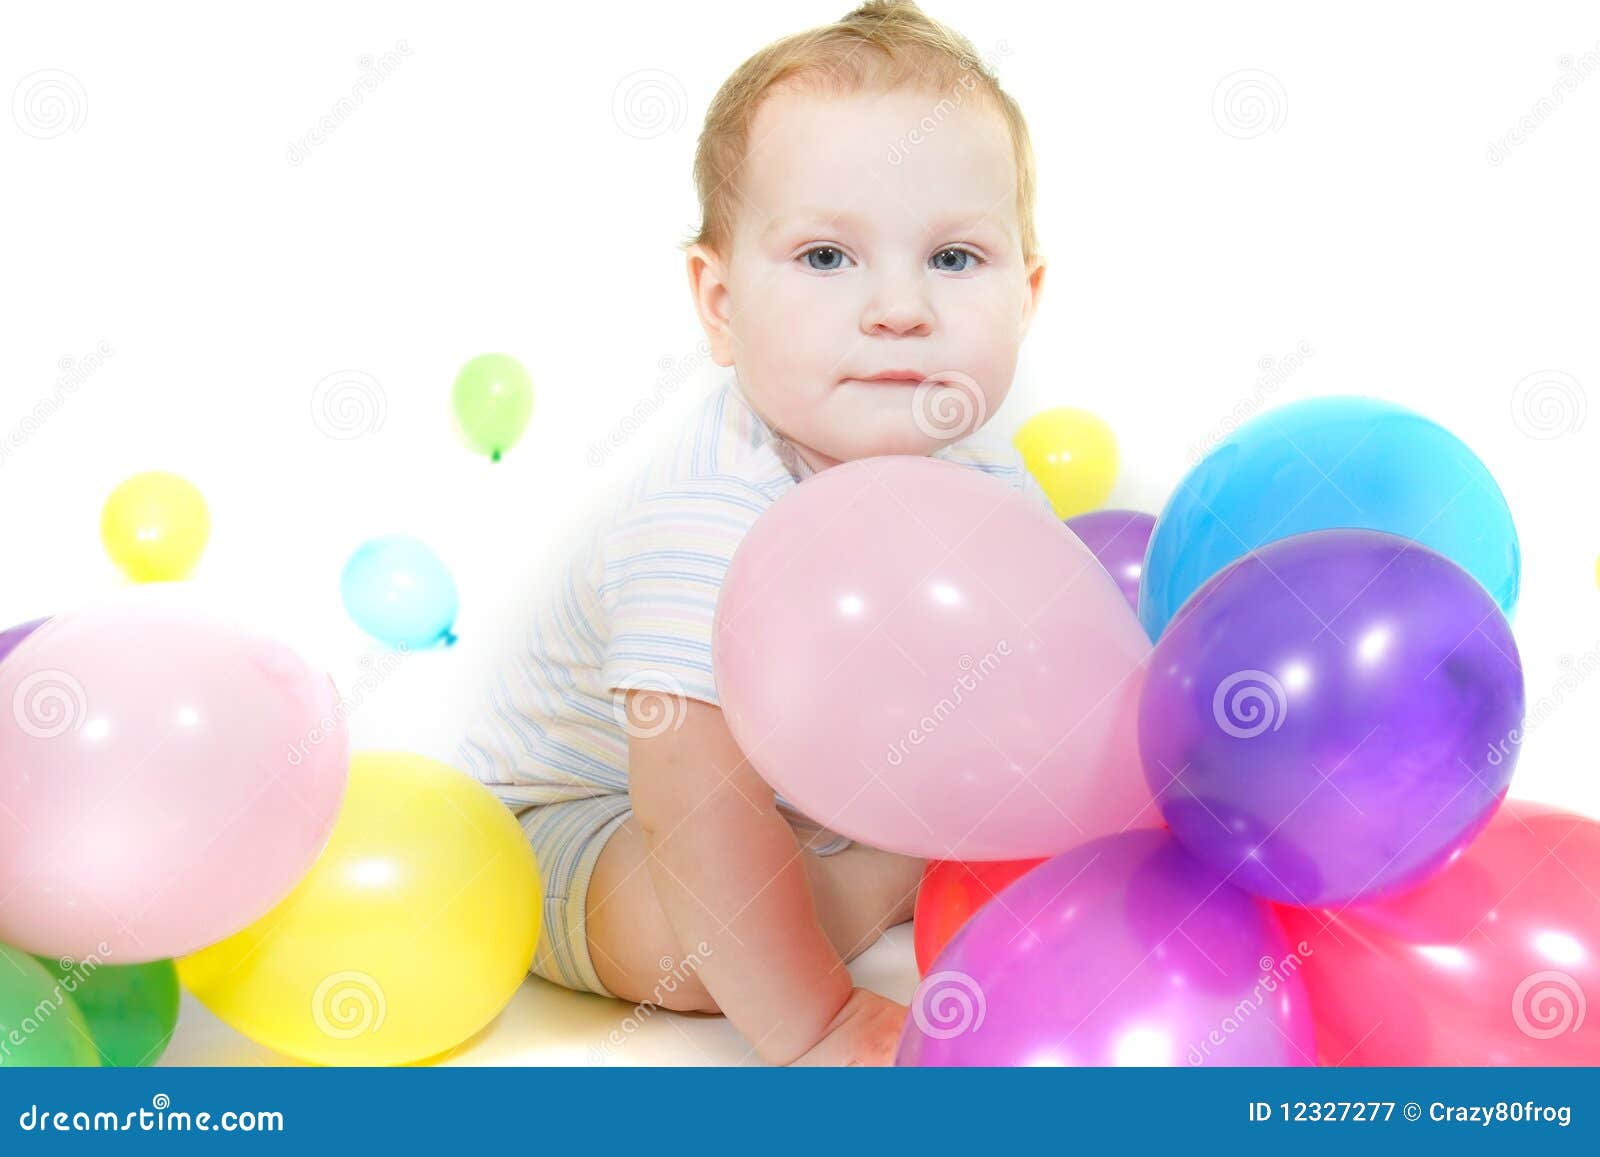 Cute Baby with Colorful Balloons Stock Image - Image of caucasian, baby ...